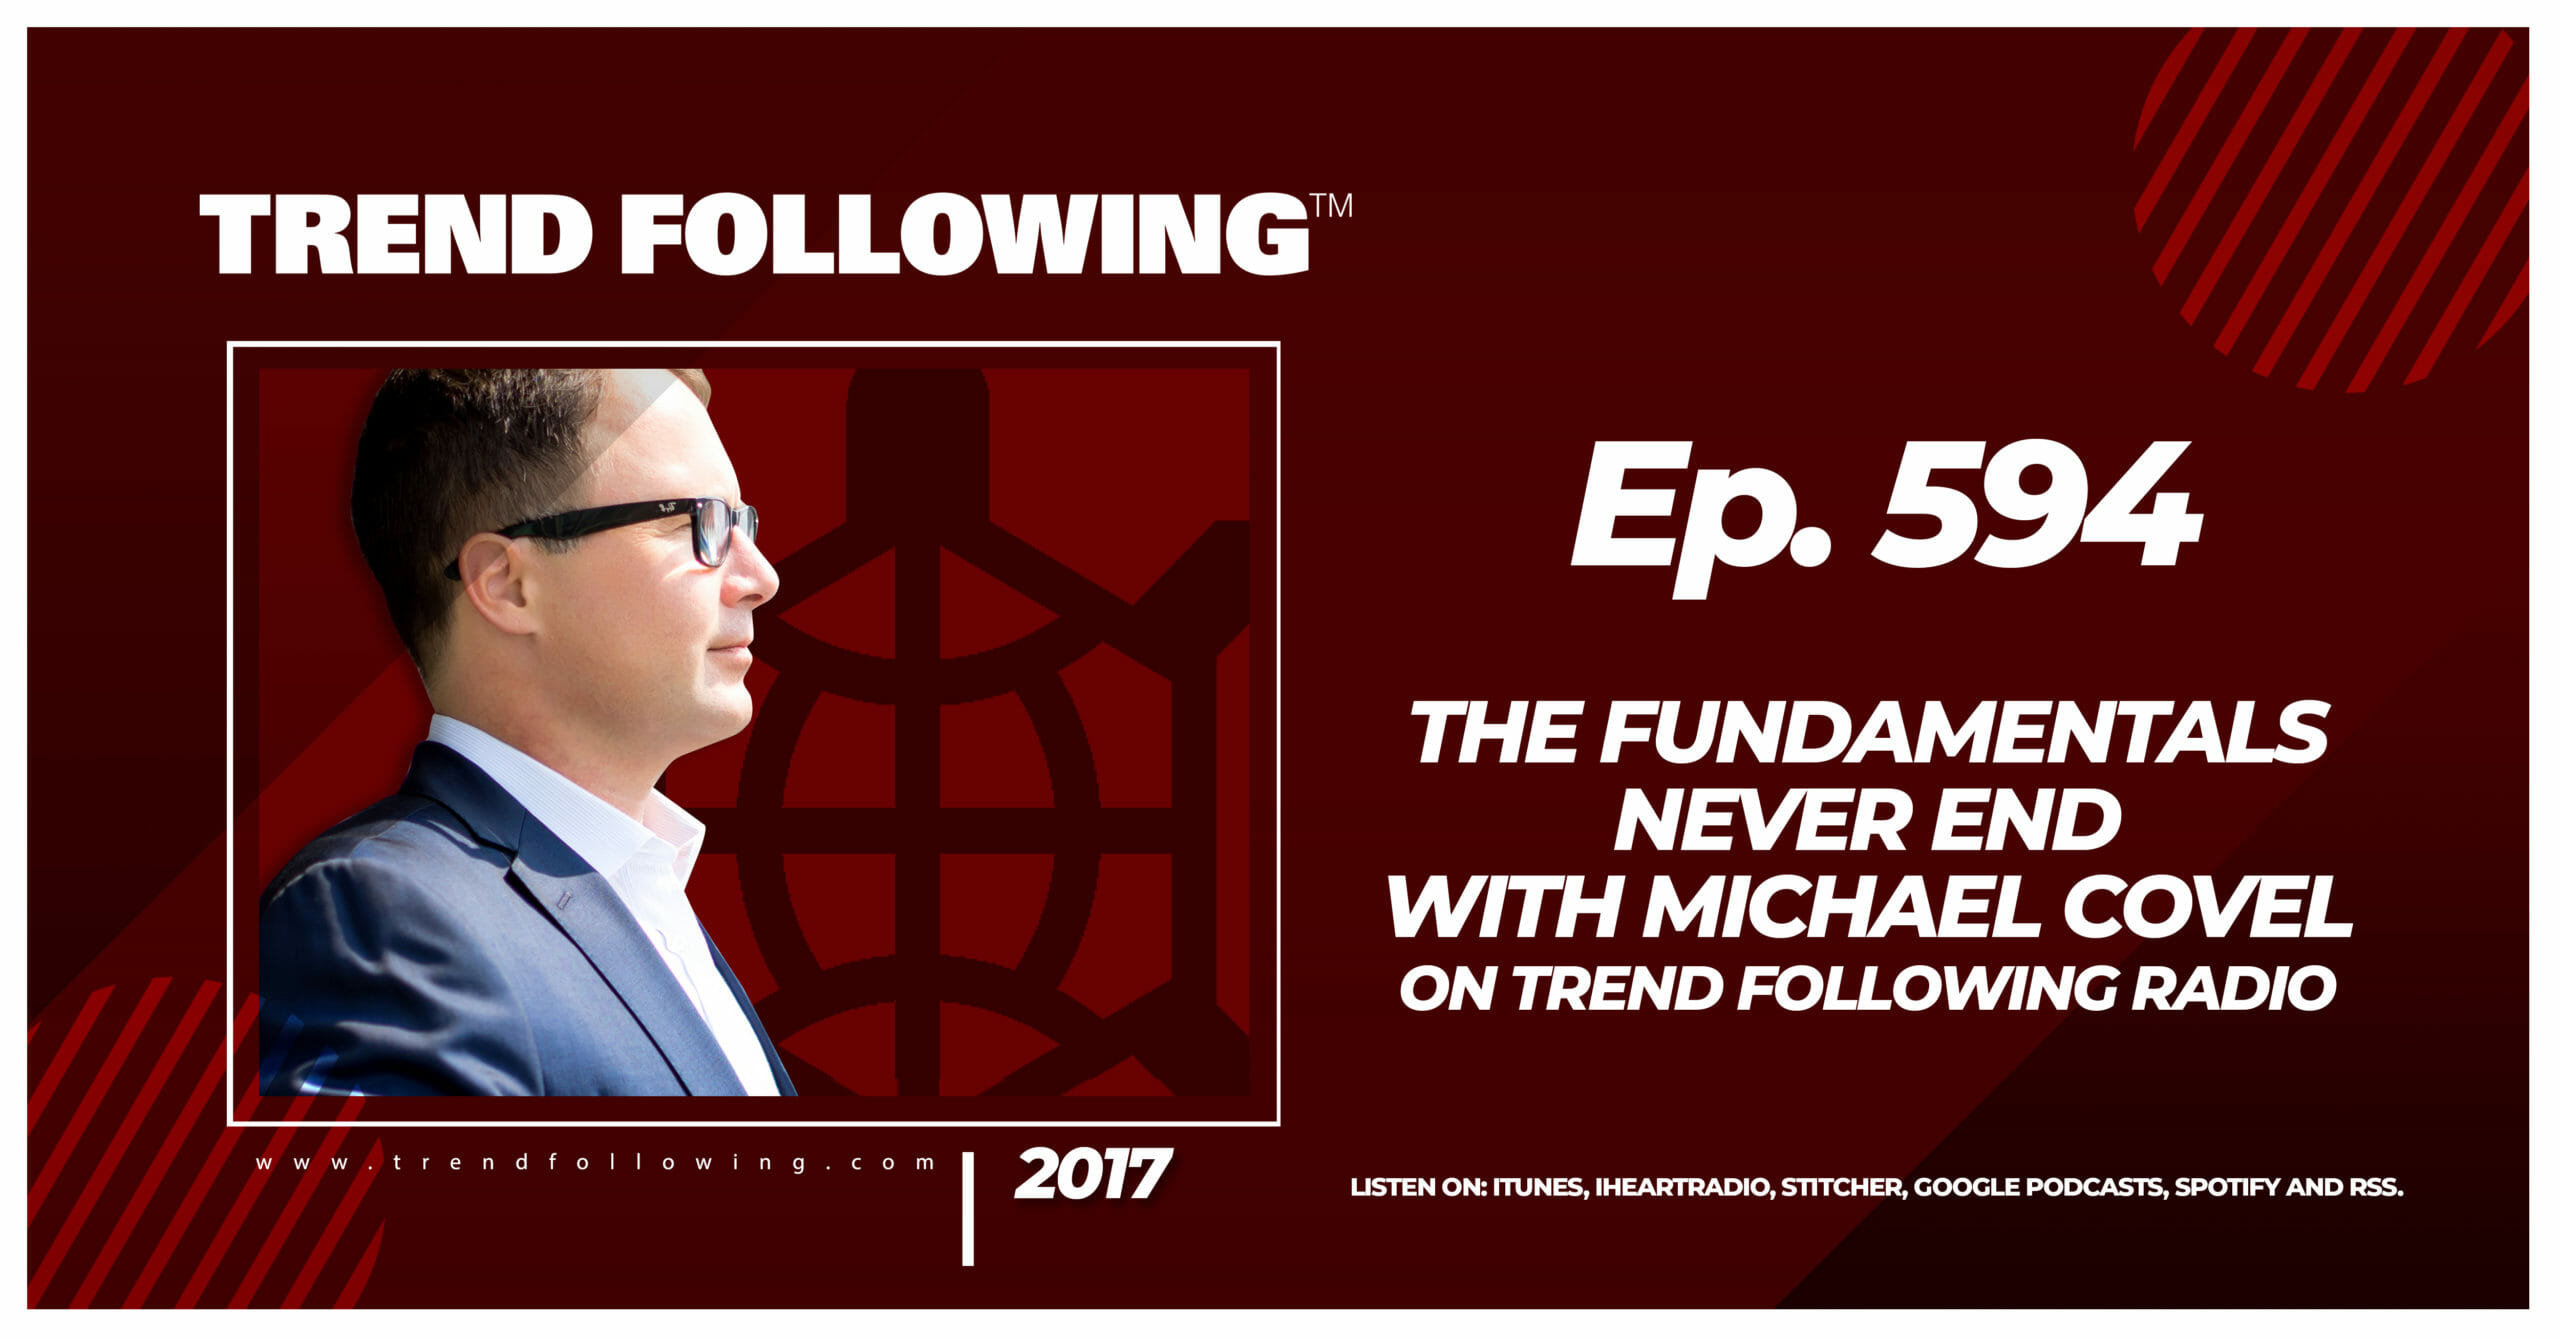 The Fundamentals Never End with Michael Covel on Trend Following Radio